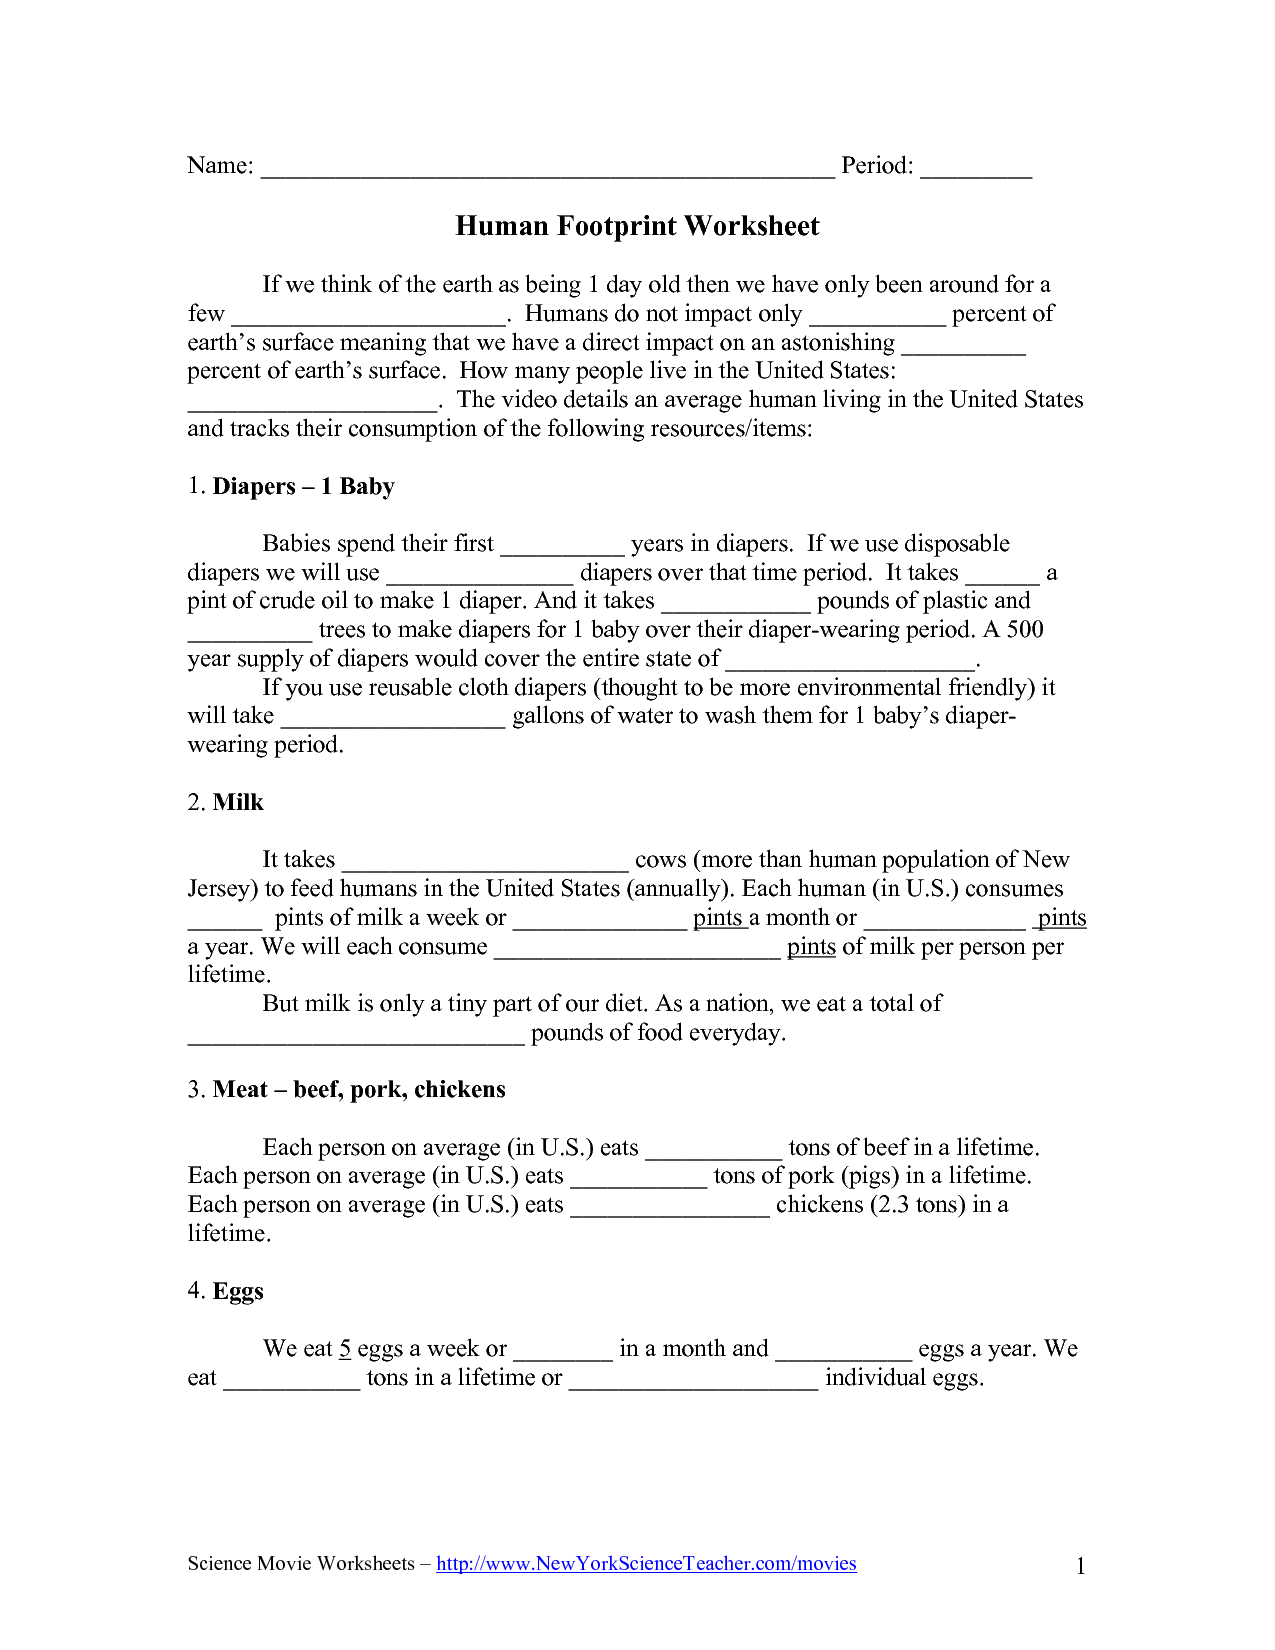 8 Best Images of Parts Of The Earth Worksheet - Planet Earth Layers